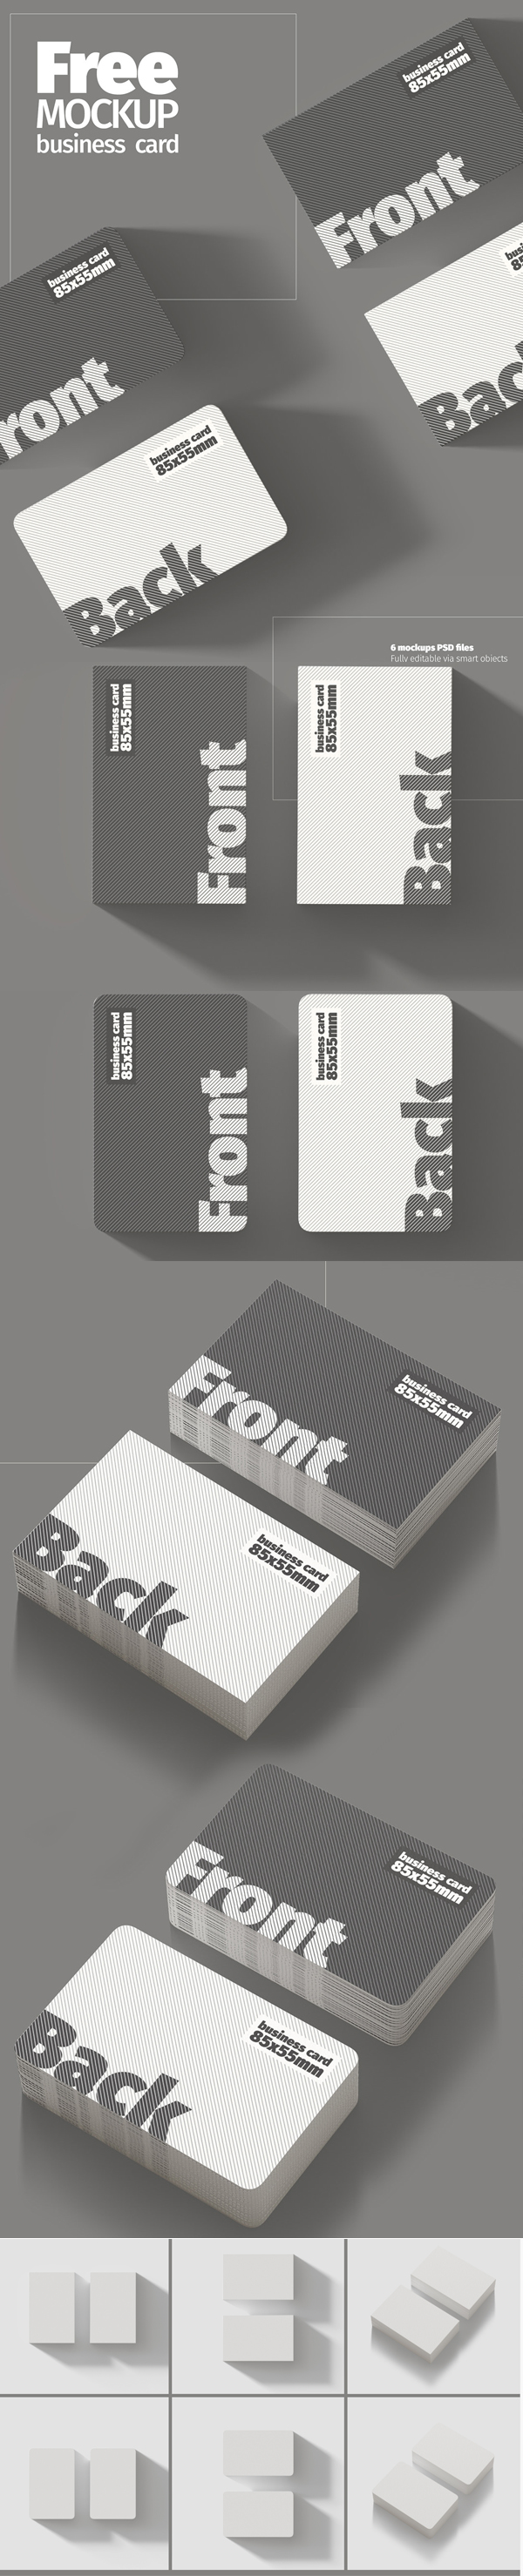 Free High Quality Business Card Mockup Template